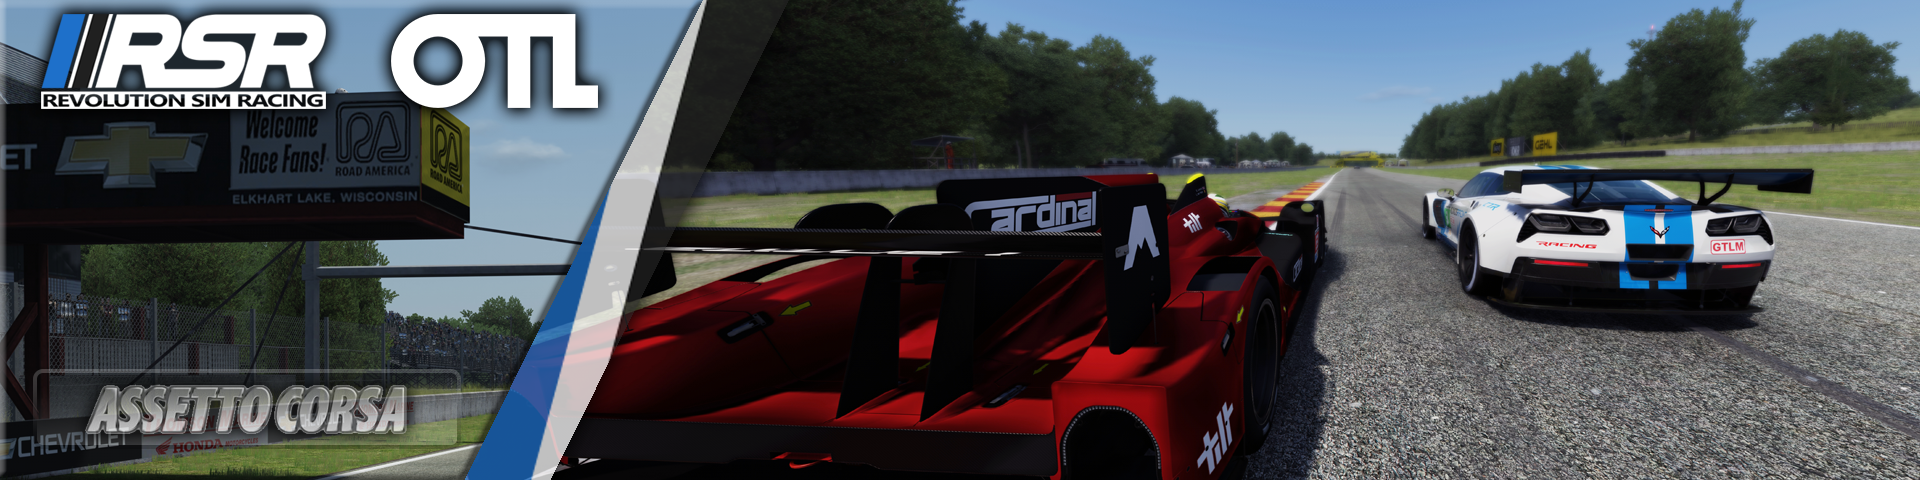 Round 3 - Road America.png